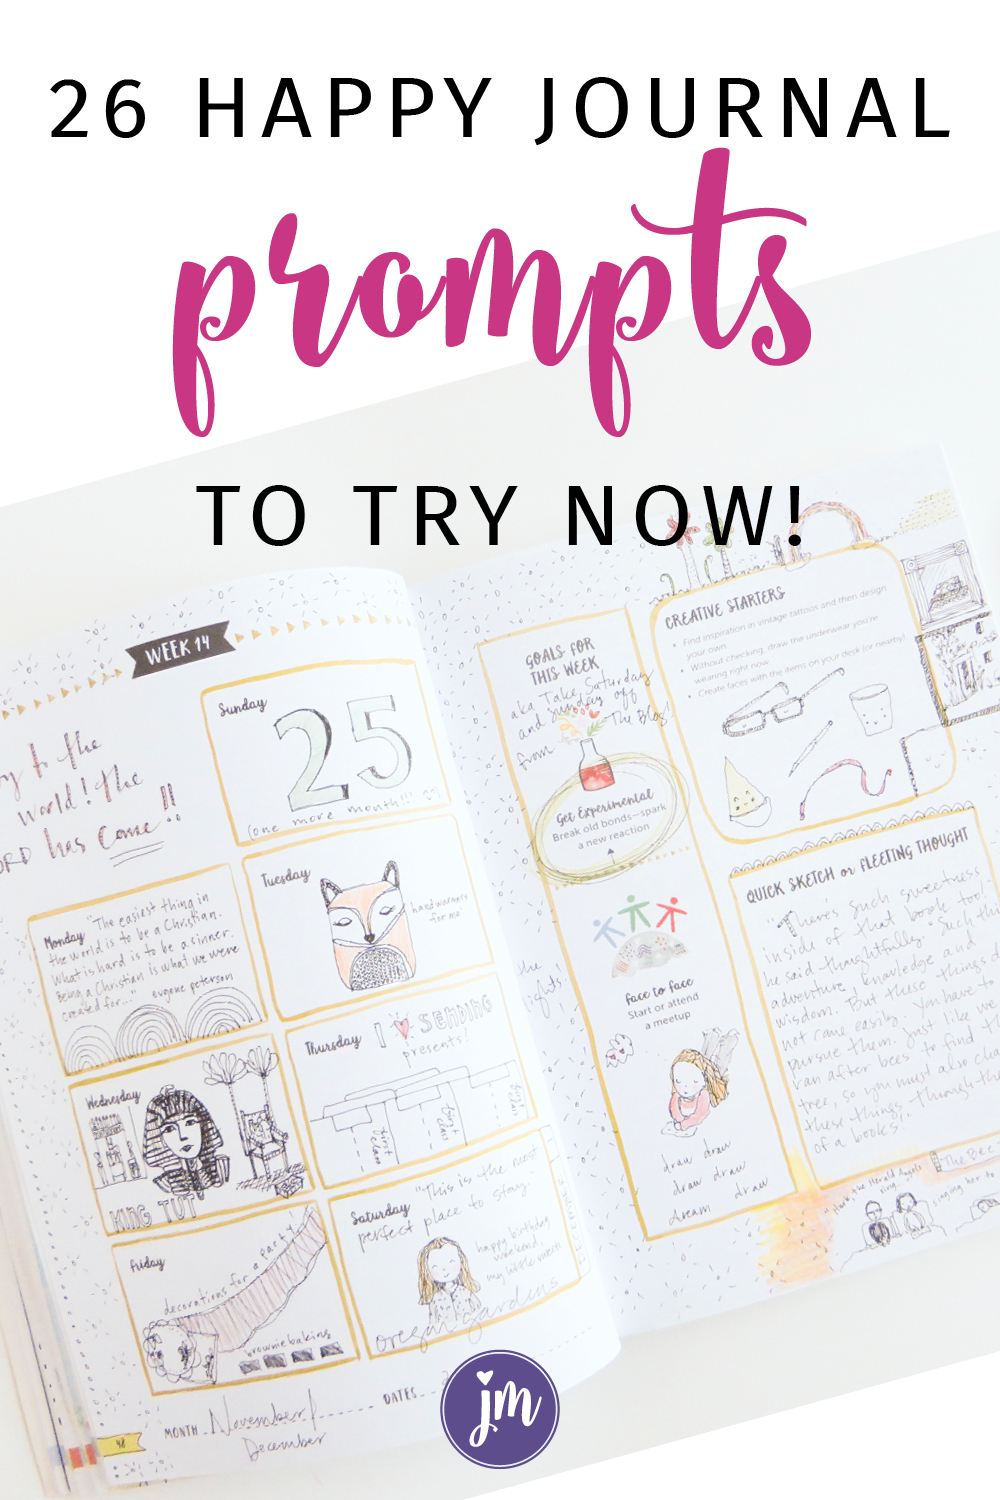 LOVE these prompts! They're great for bullet journals too! A happy journal is the cute, rambunctious kiddo of an art journal and gratitude journal. No need to pull out all the art supplies to make an art journal spread . . . and no need to keep a list a mile long of everything you're grateful for in life. I love my happy journal so much! #happyjournalhappylife